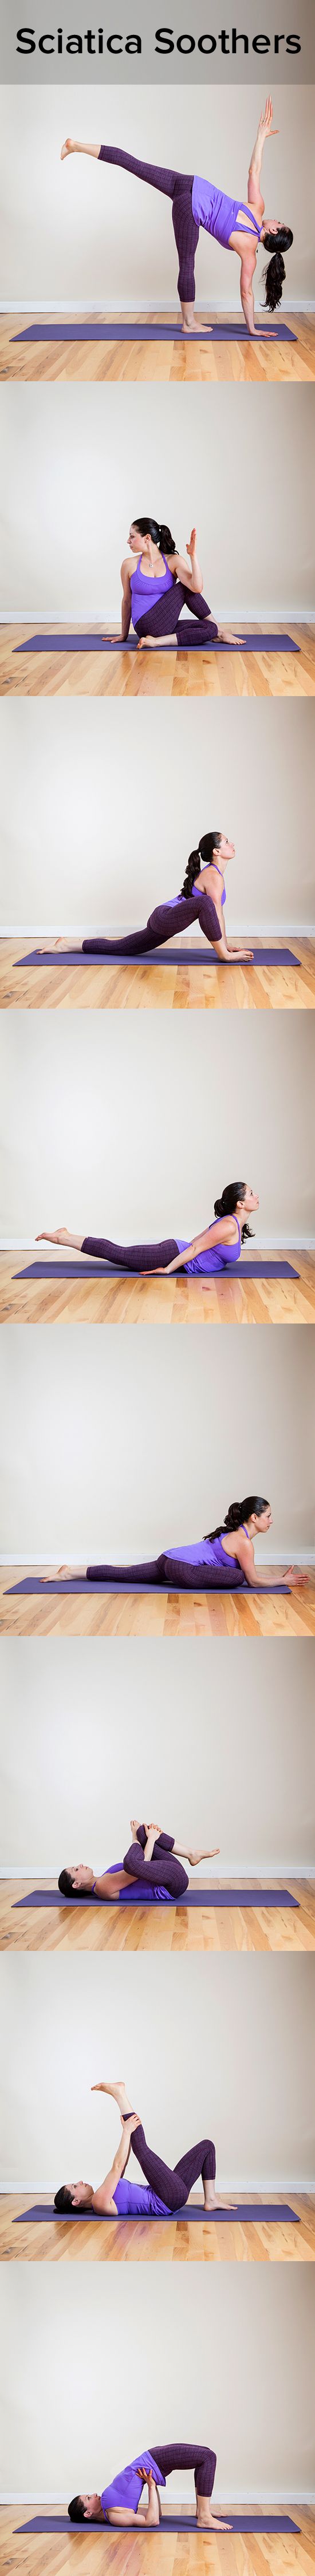 4 Yoga Poses for Sciatica Back Pain Relief - Organic Authority